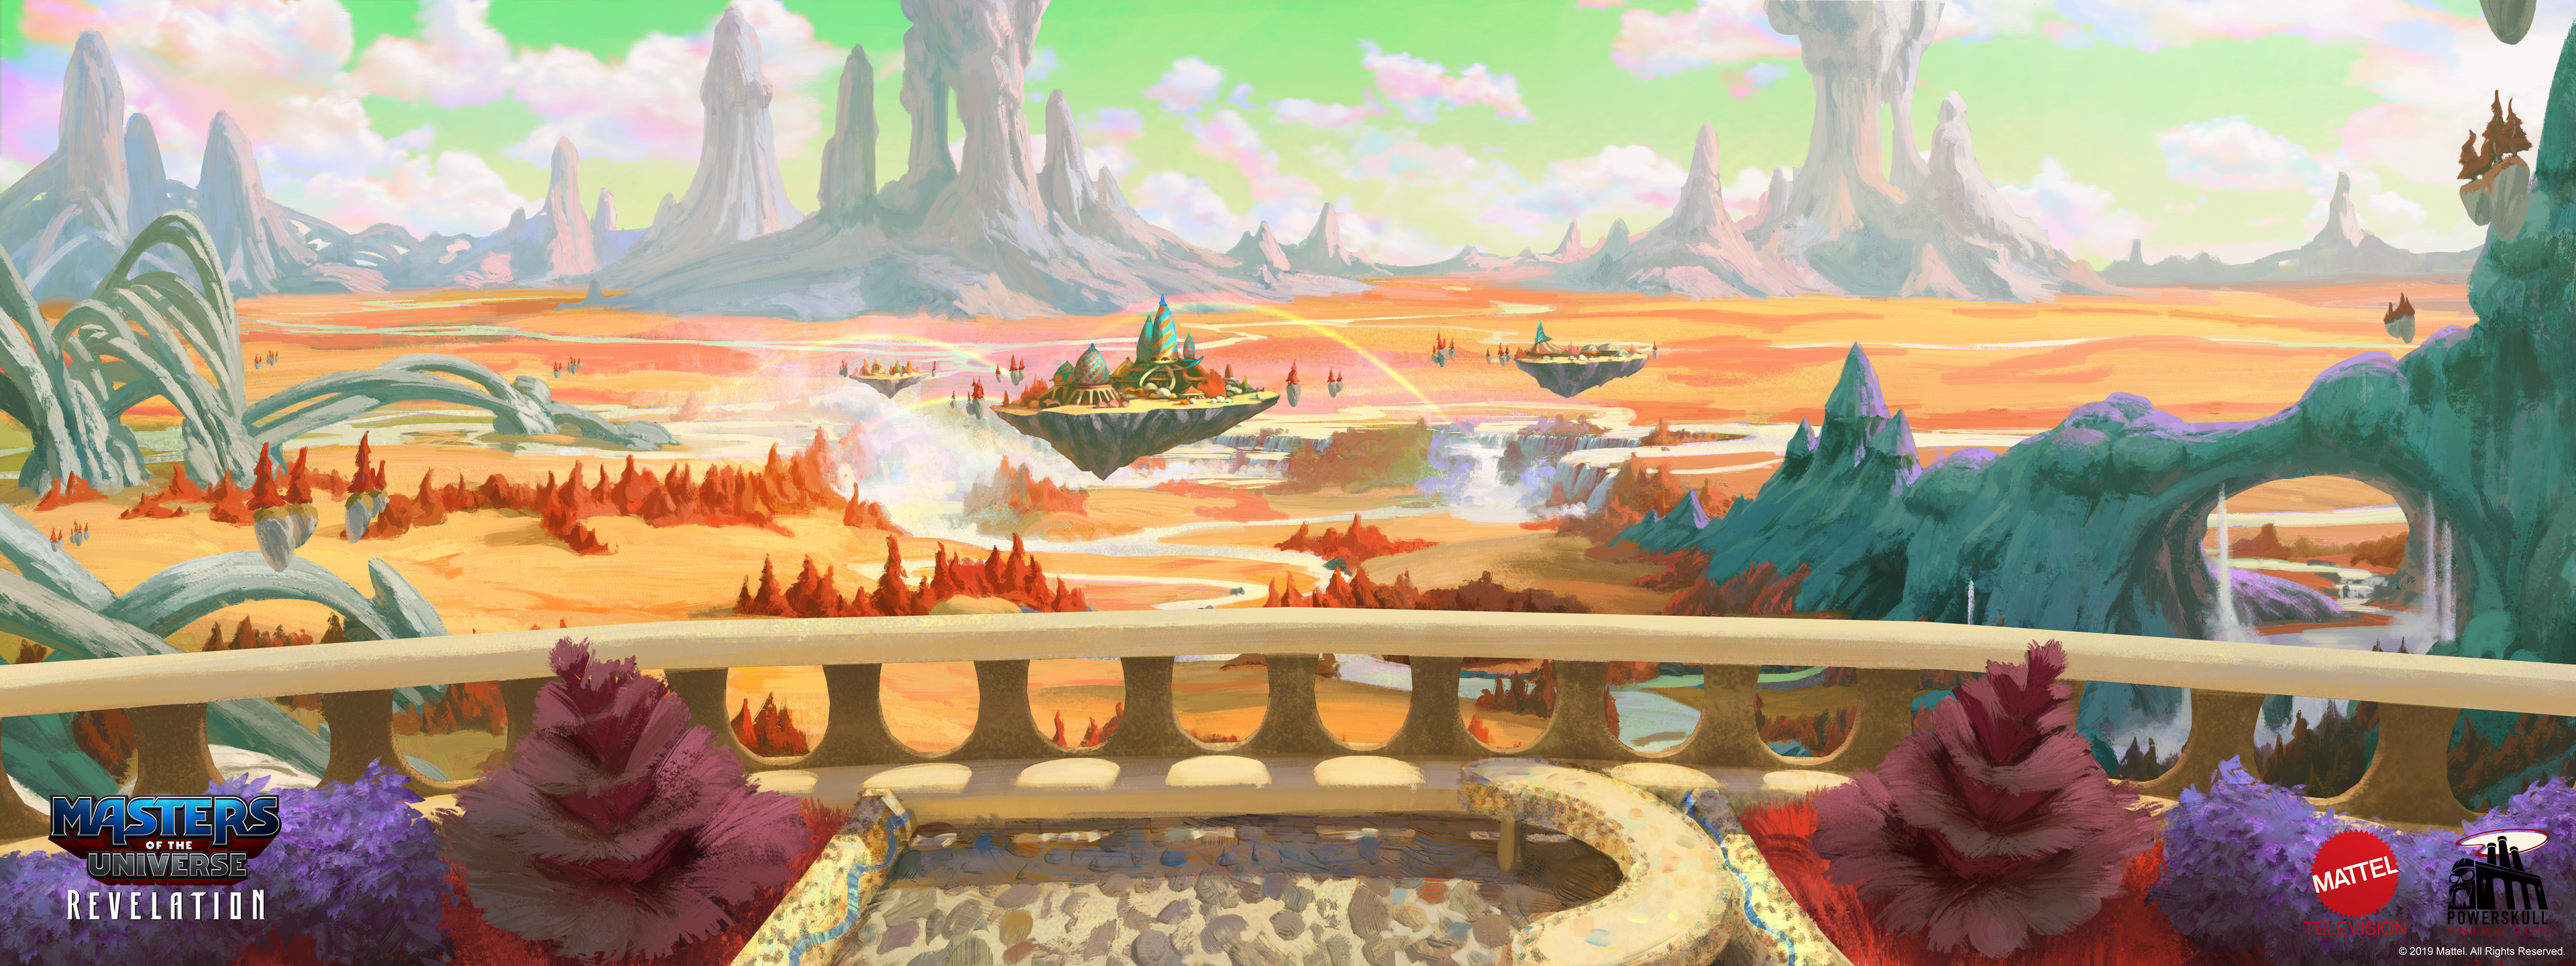 Masters of the Universe: Revelation HD wallpaper featuring Eternian landscape with Castle Grayskull, vivid skies, and fantasy terrain.